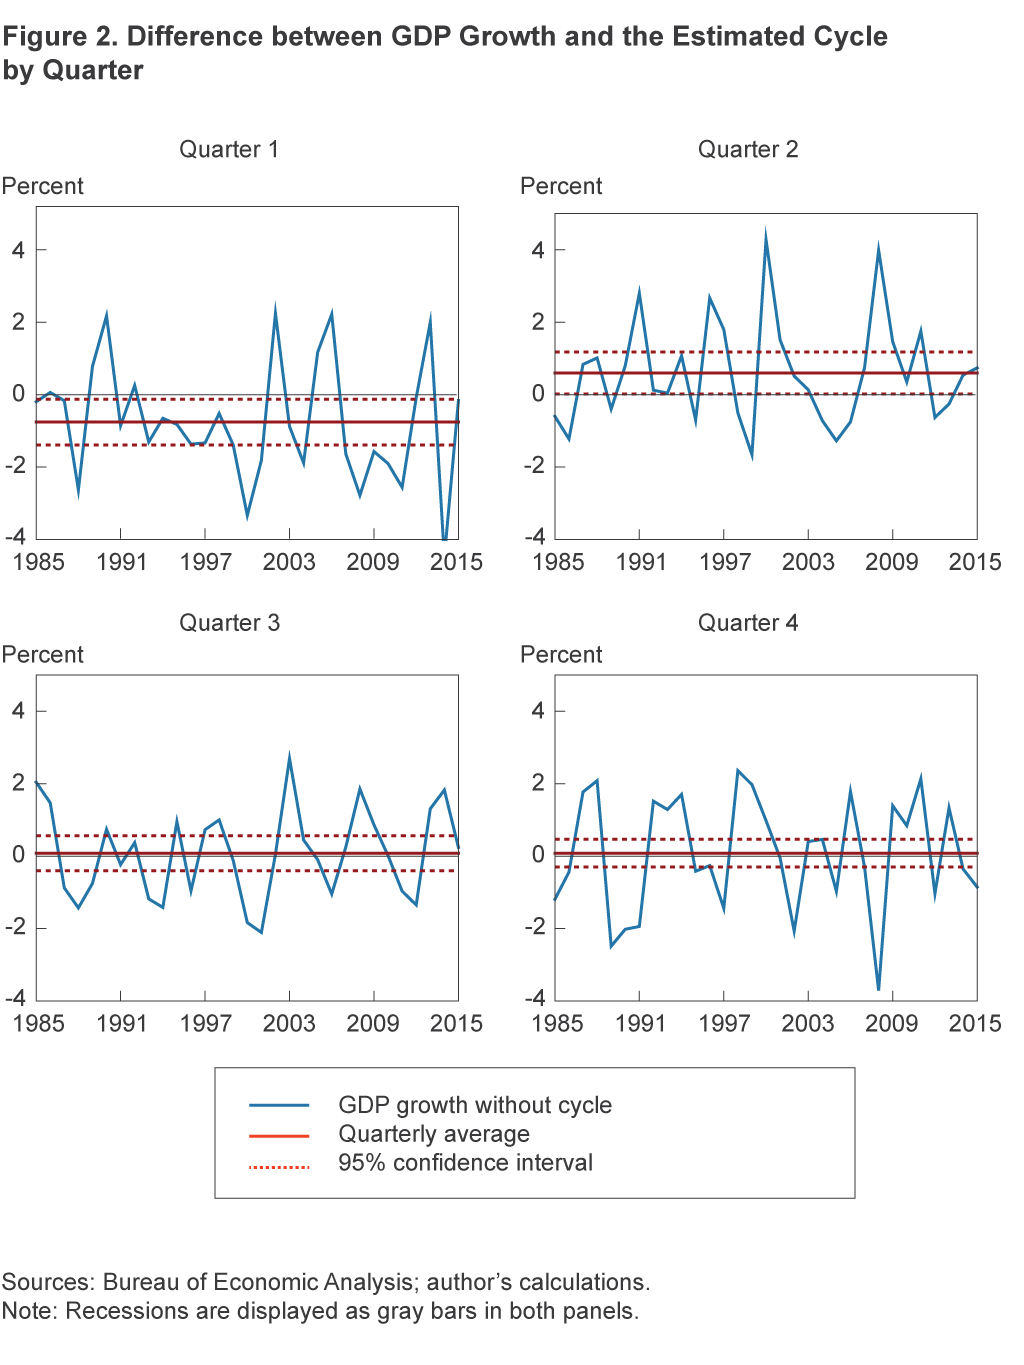 Figure 2. Difference between GDP Growth and the Estimated Cycle by Quarter